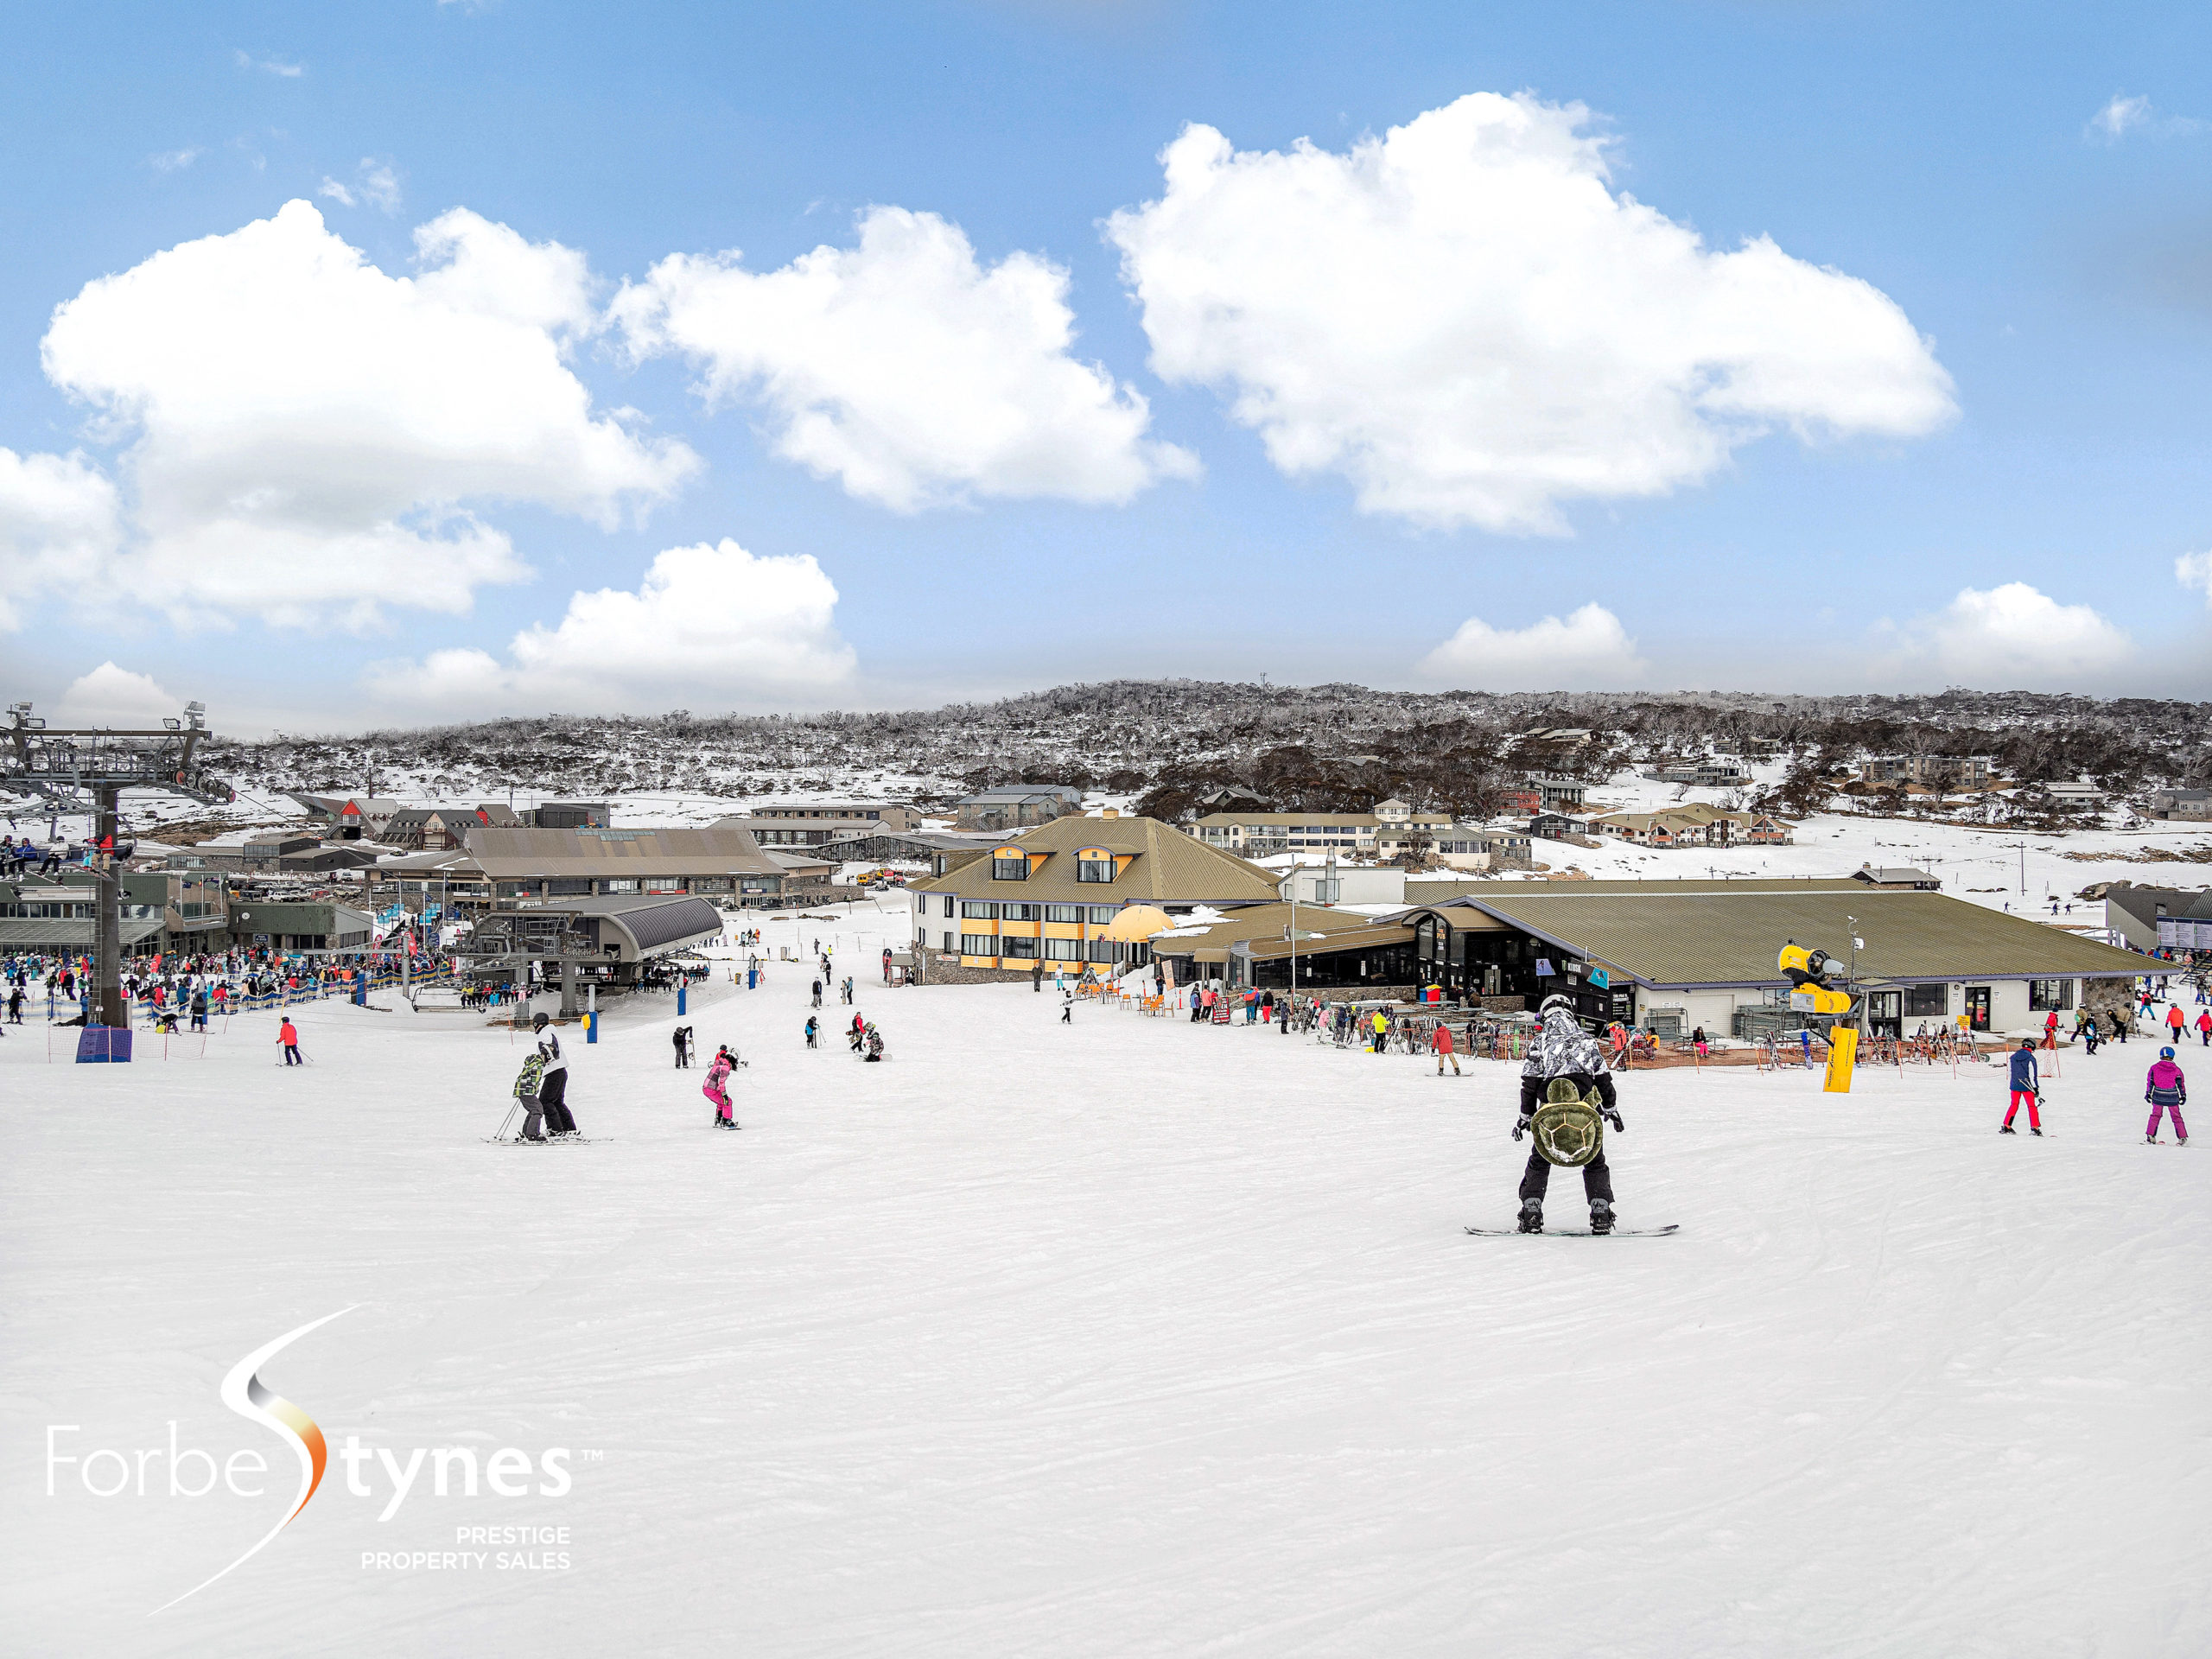 One of the largest Commercial Ski Hotels<br>The Perisher Manor<br>Expressions of Interest close 26th August 2022